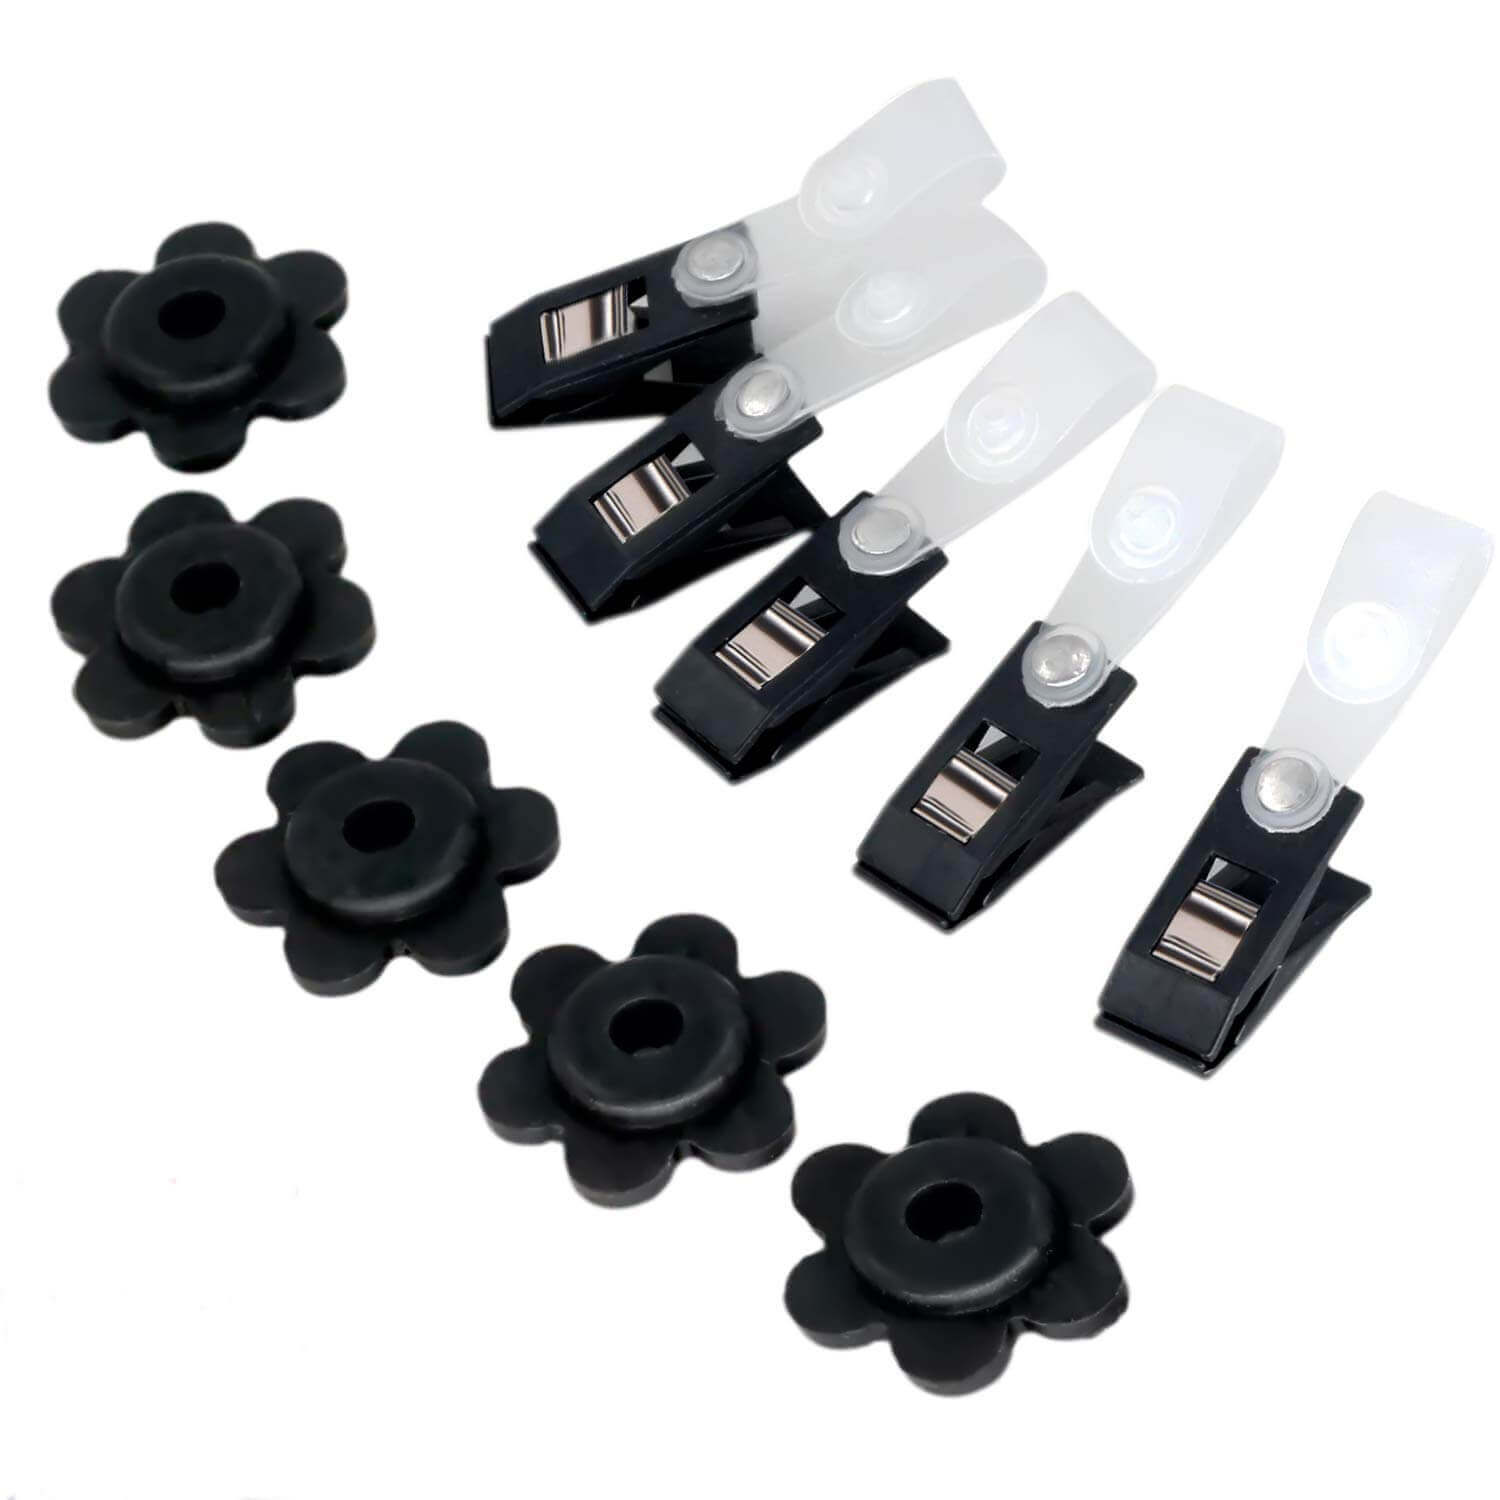 Anley Accessories 10 Pack Garden Flag Rubber Stoppers and Anti-Wind Clips